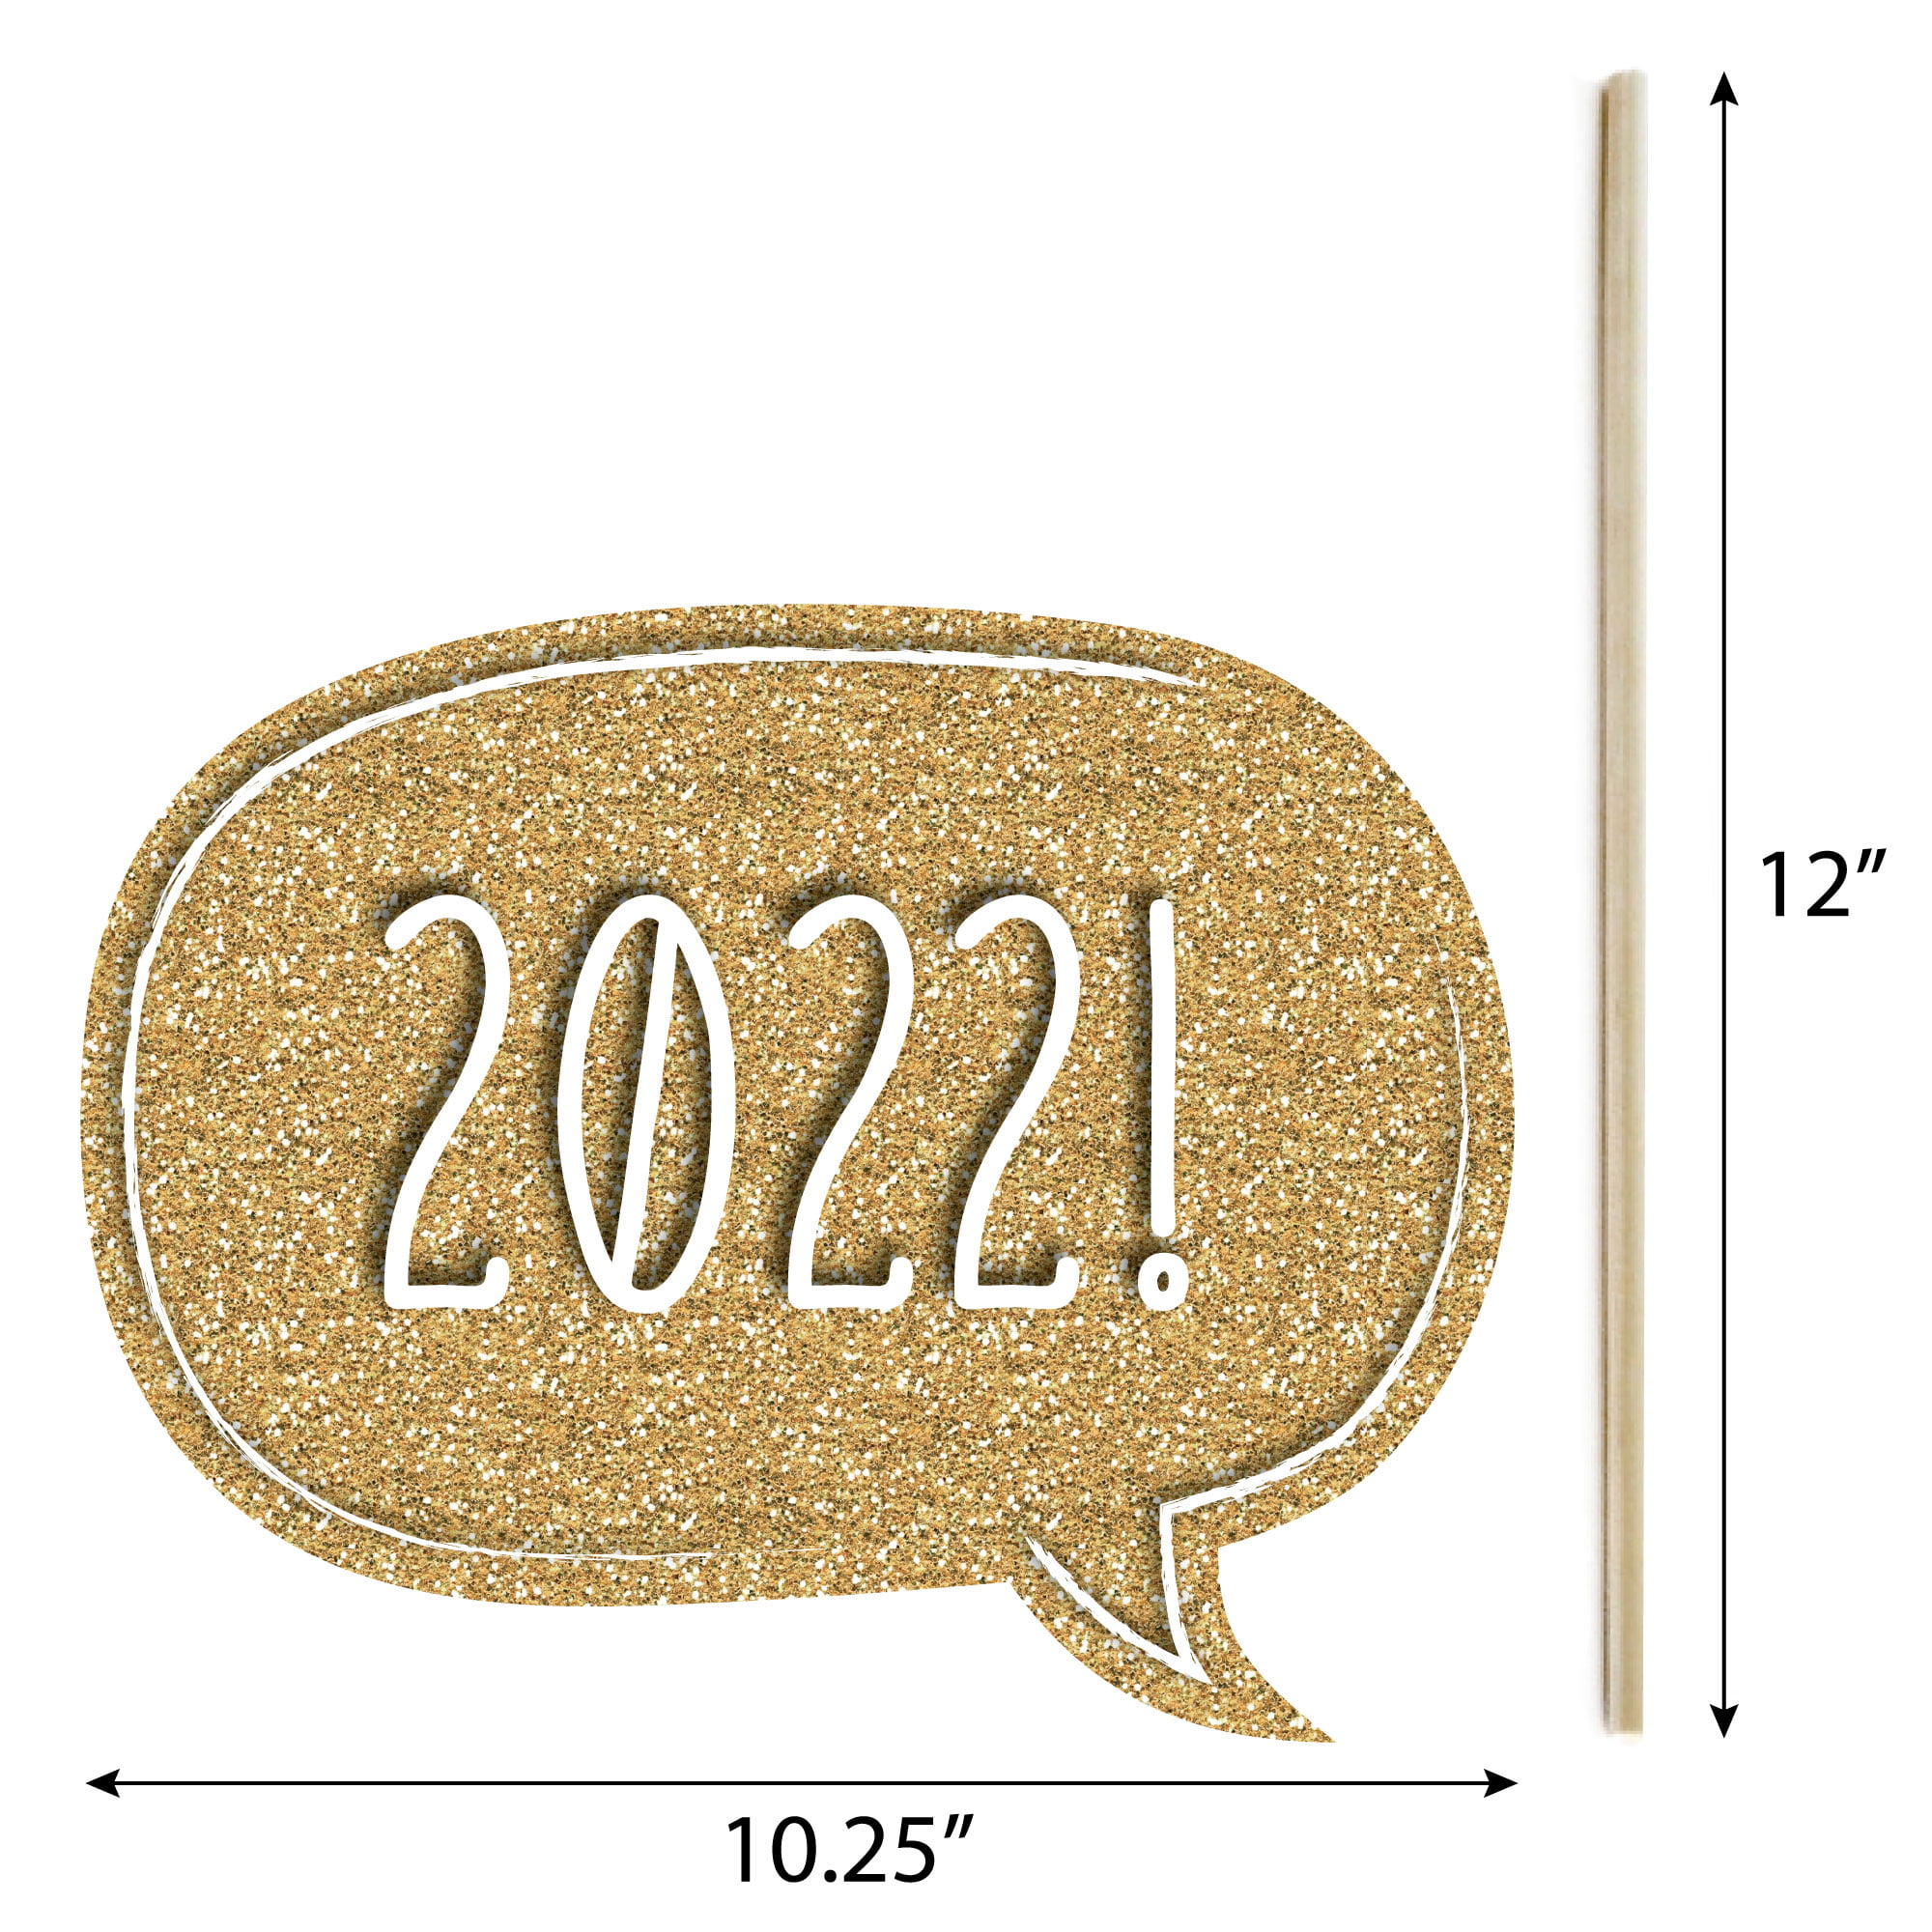 PRETYZOOM 20pcs 2022 New Years Photo Booth Props Selfie Photo Props Kit Festival Backdrop Photography Props New Year Supplies 